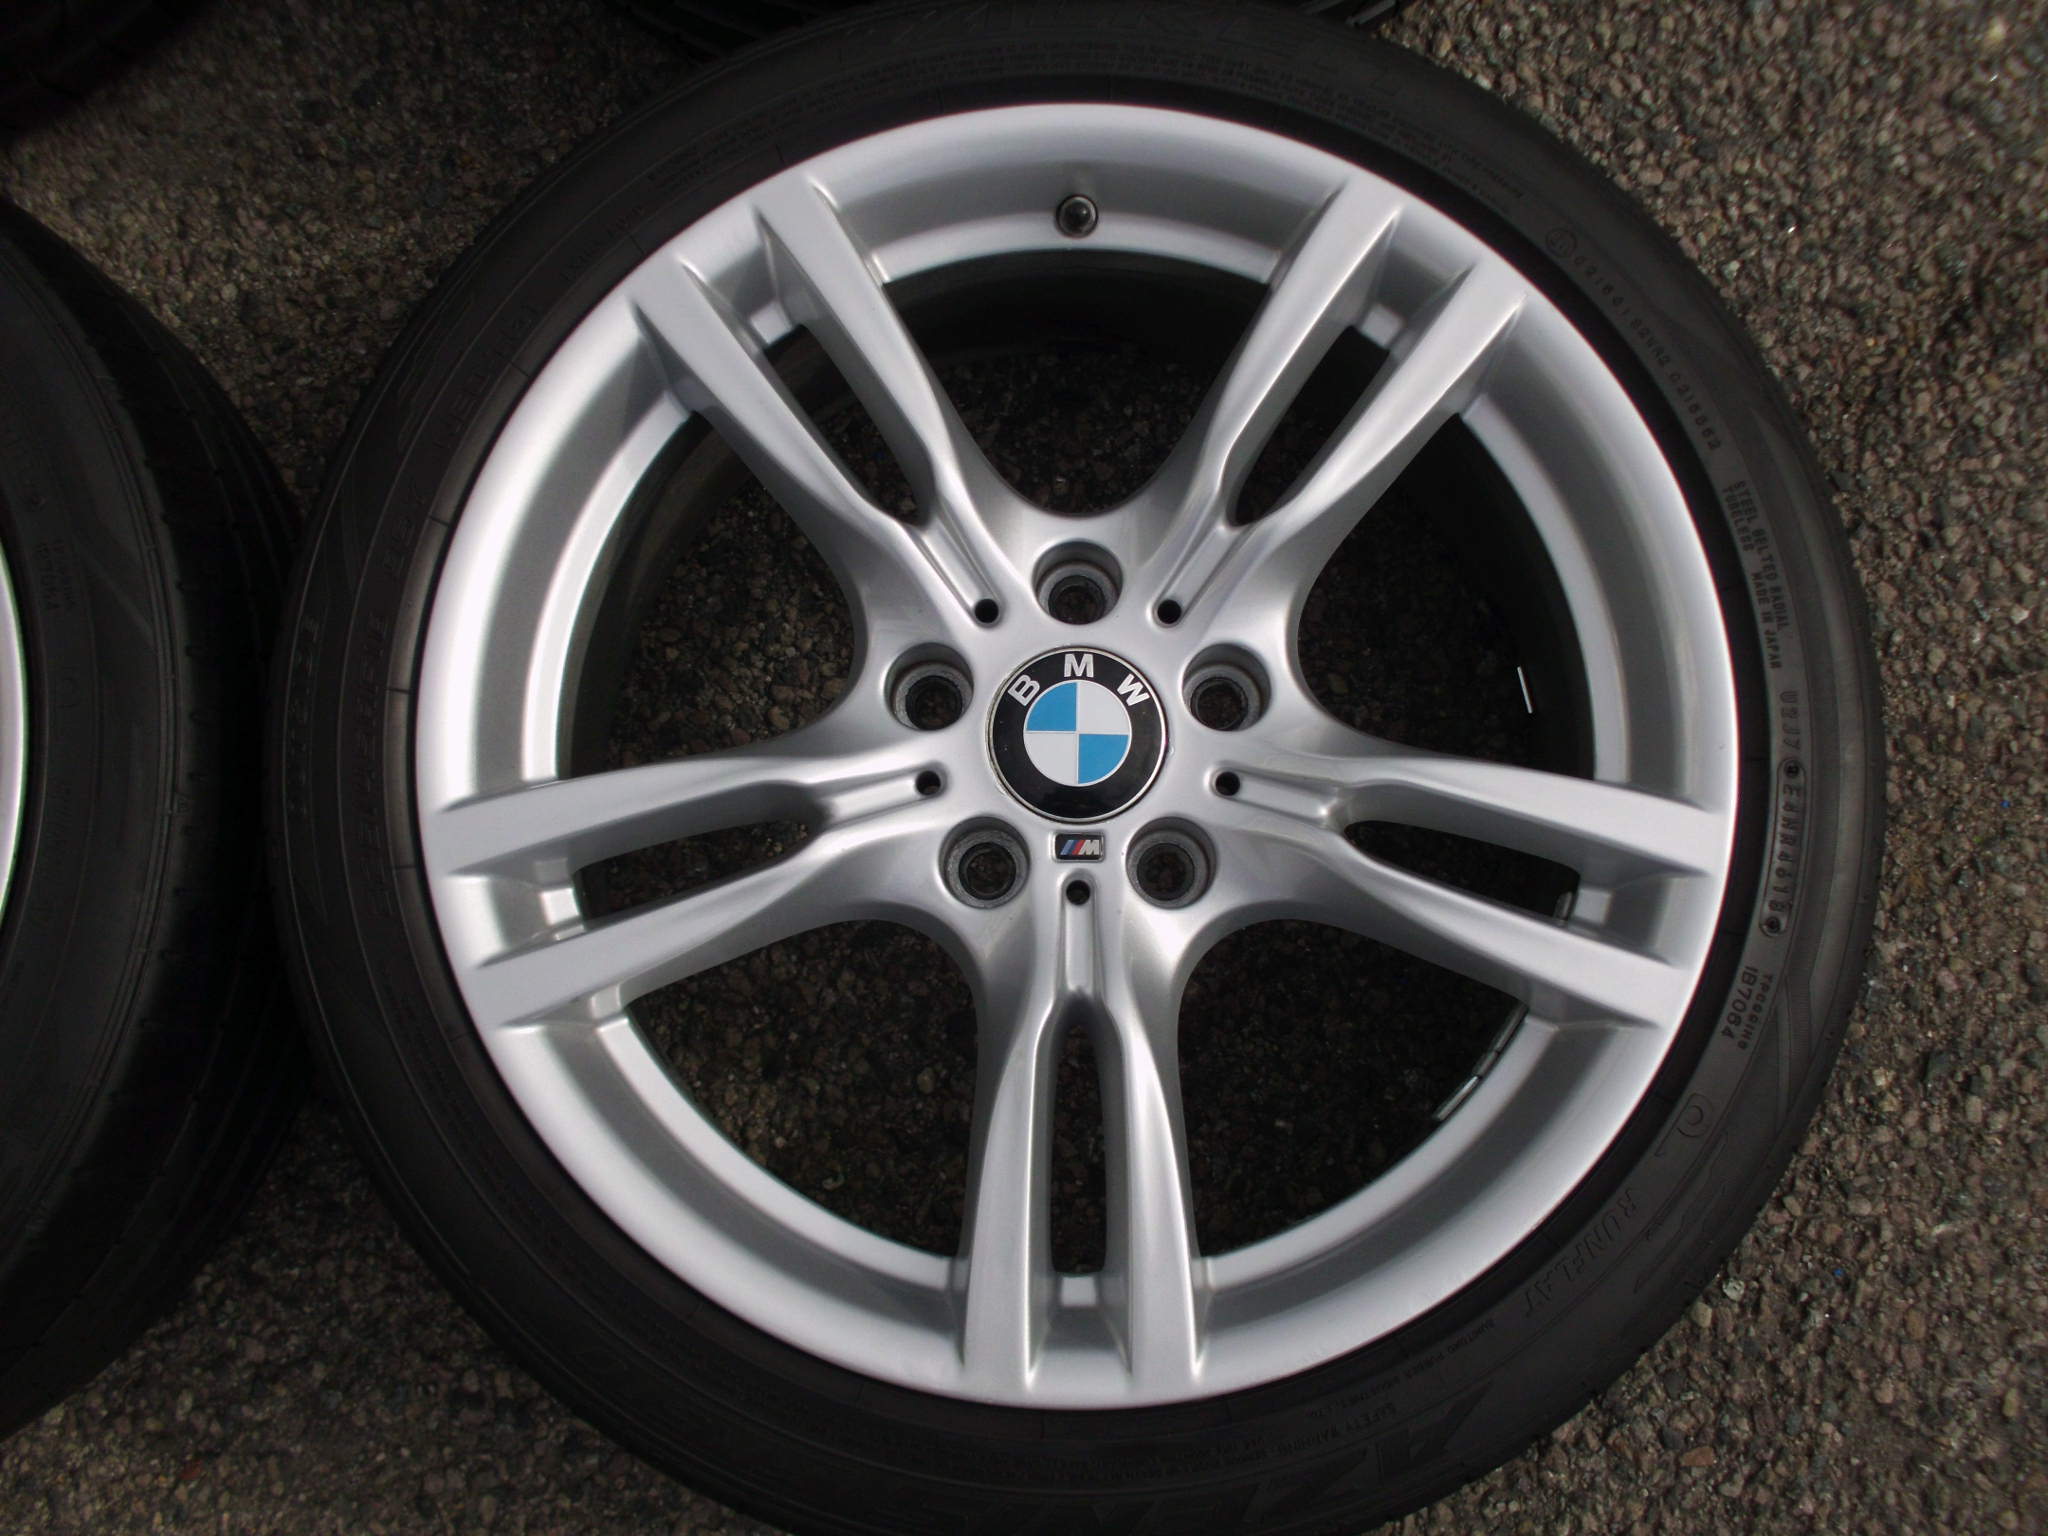 USED 18" GENUINE BMW STYLE 400 M SPORT ALLOY WHEELS, WIDER REARS,GOOD CONDITION, INC GOOD RUNFLAT TYRES + TPMS